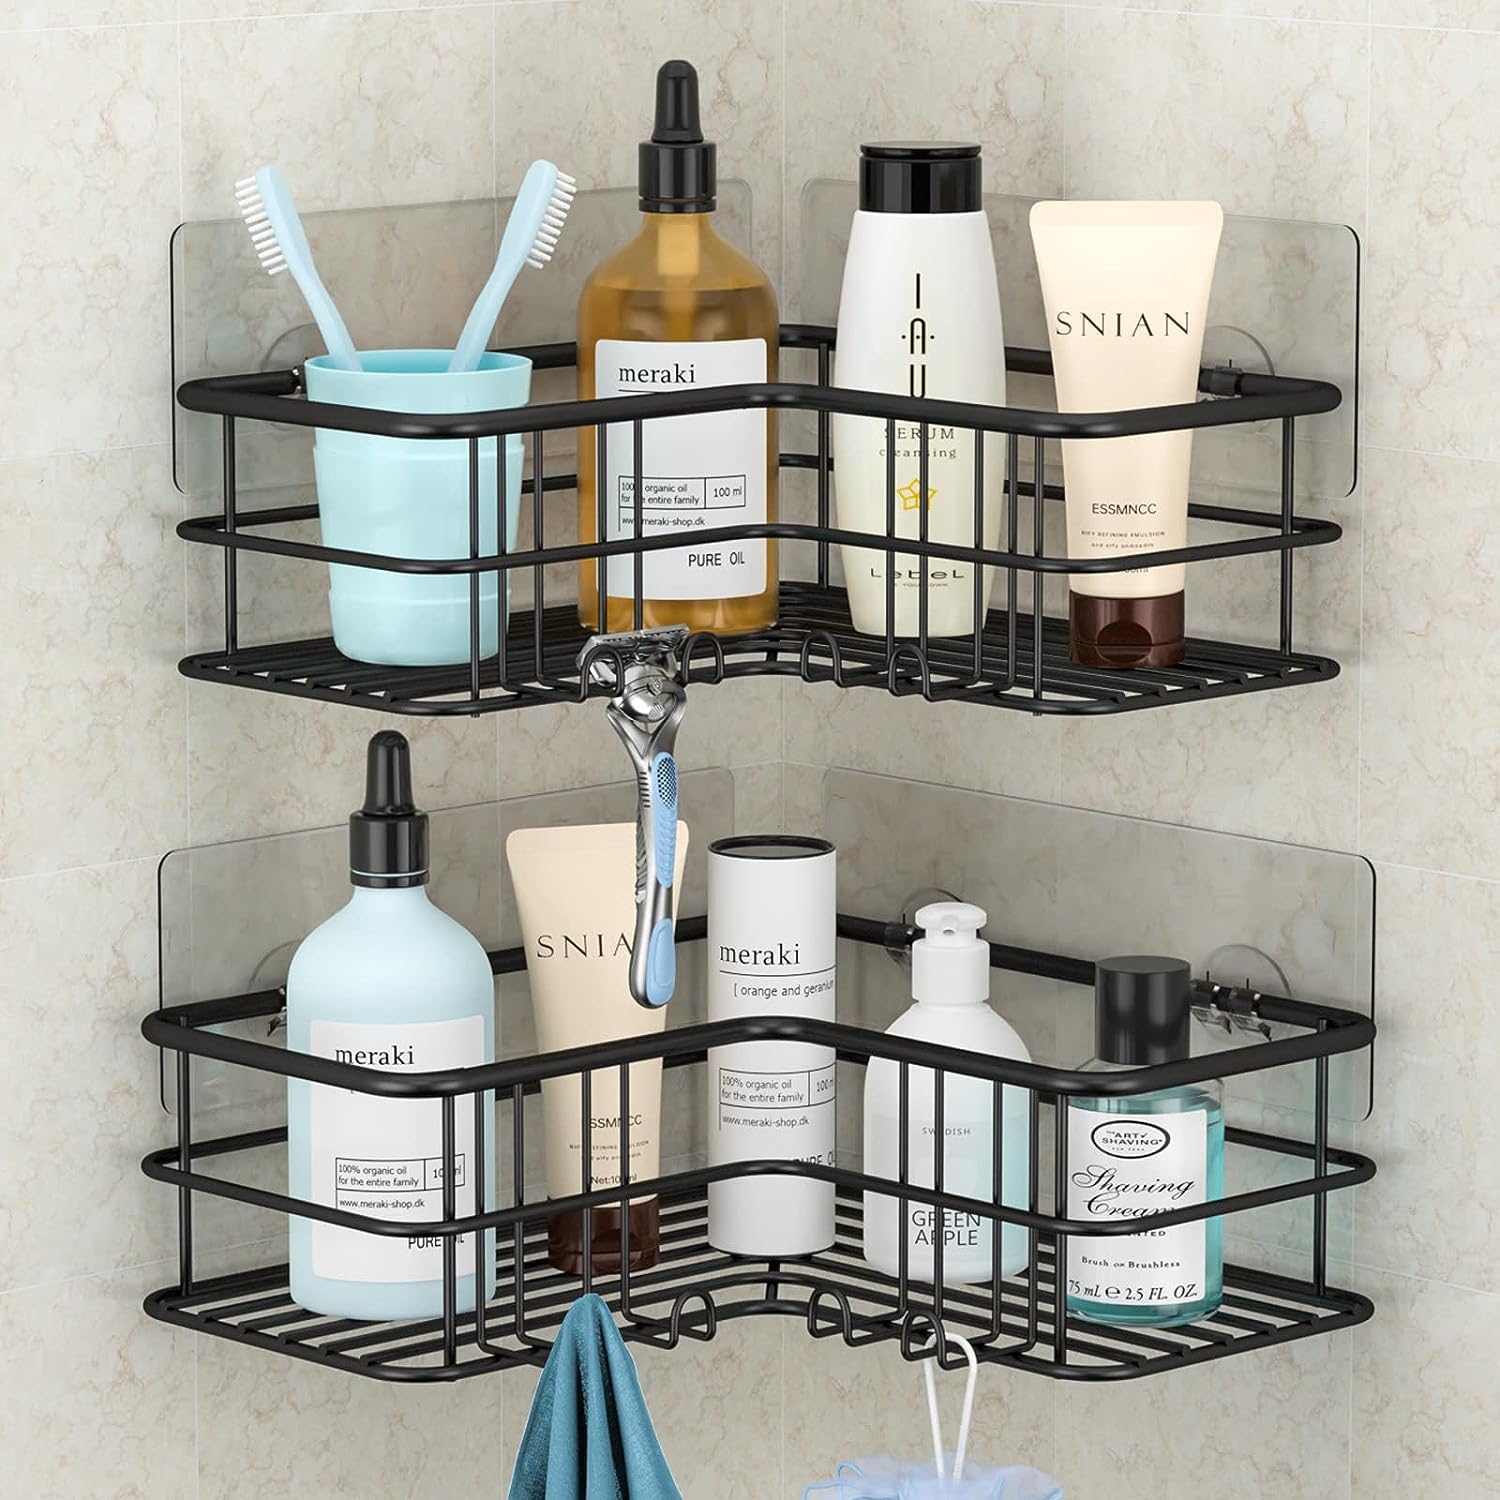 Blushbees® 3-Pack Stainless Steel Corner Shower Caddy - Black